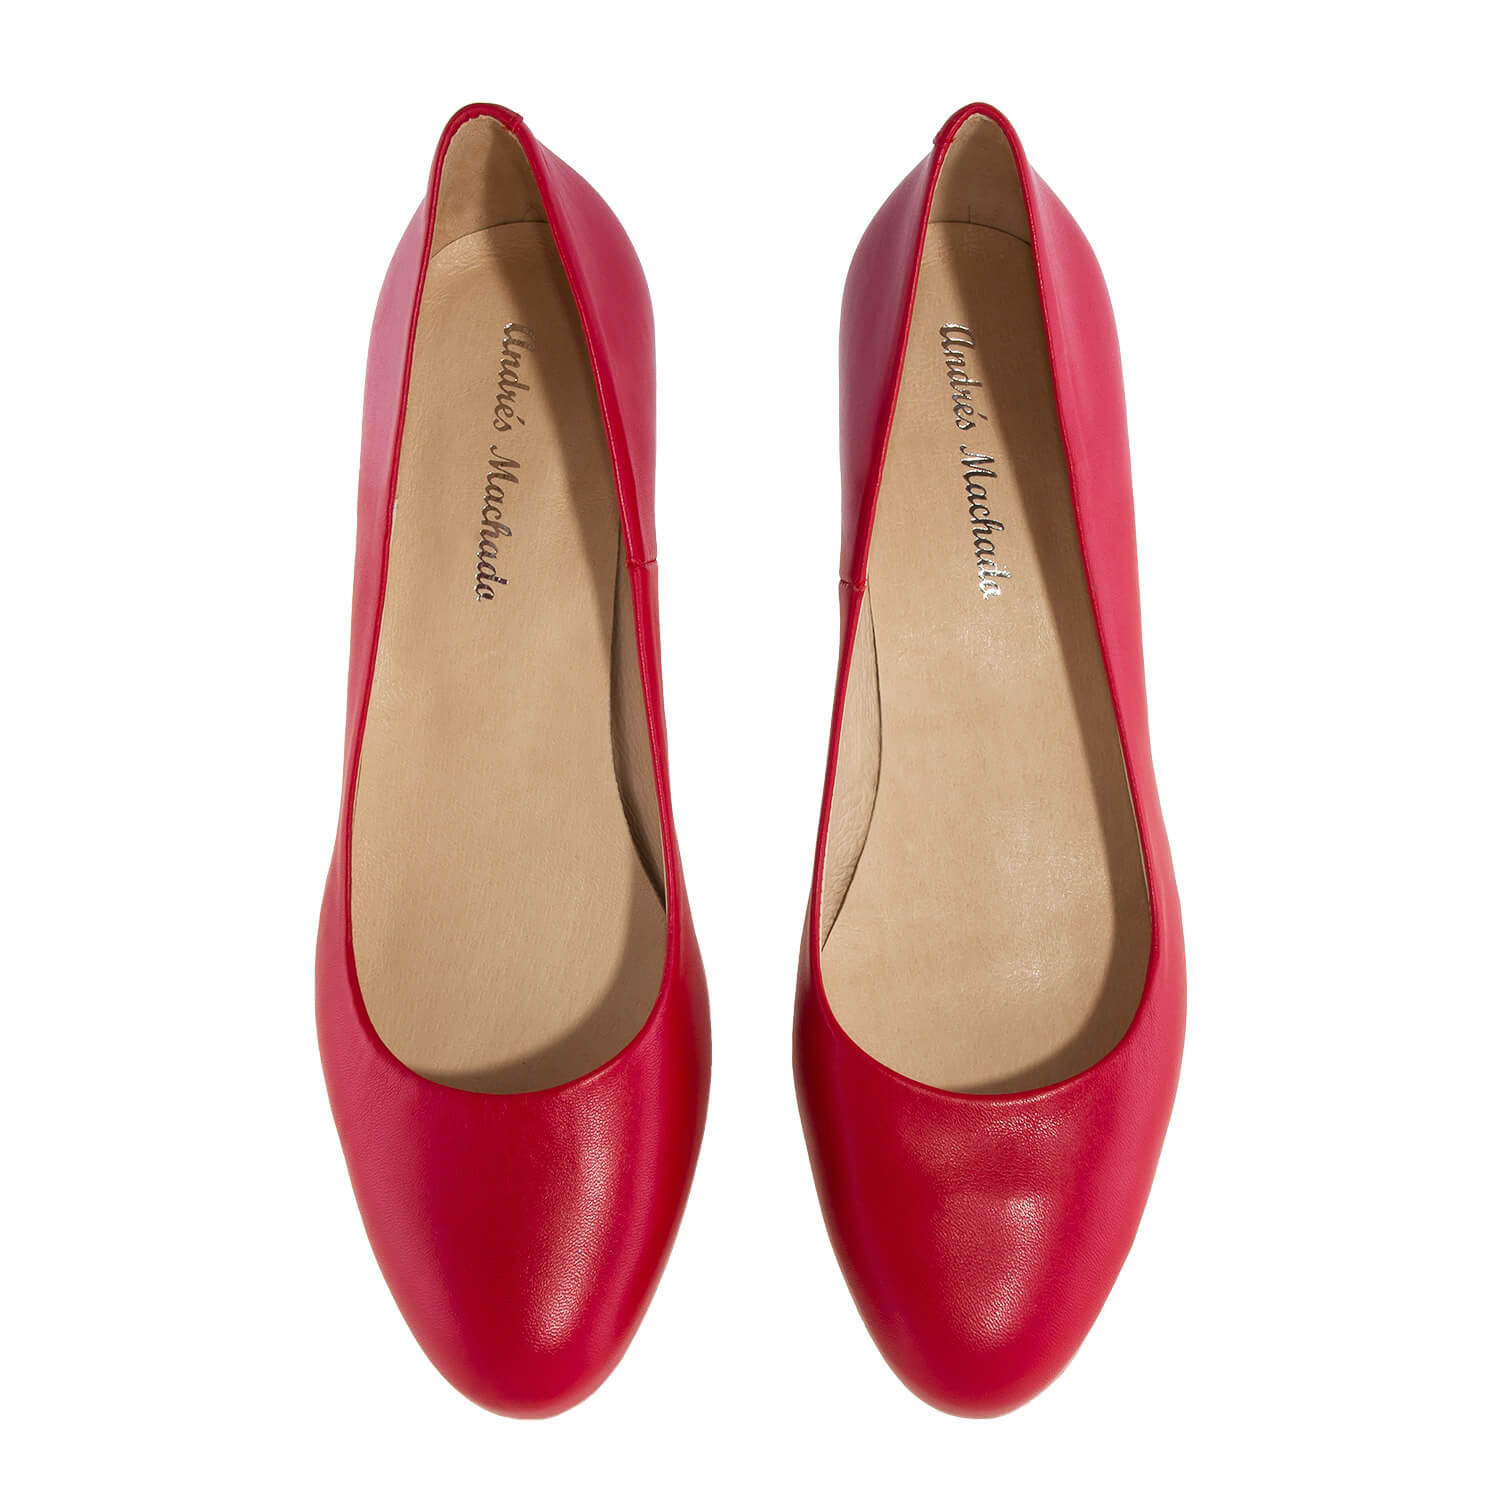 Red Leather Heeled Shoes 